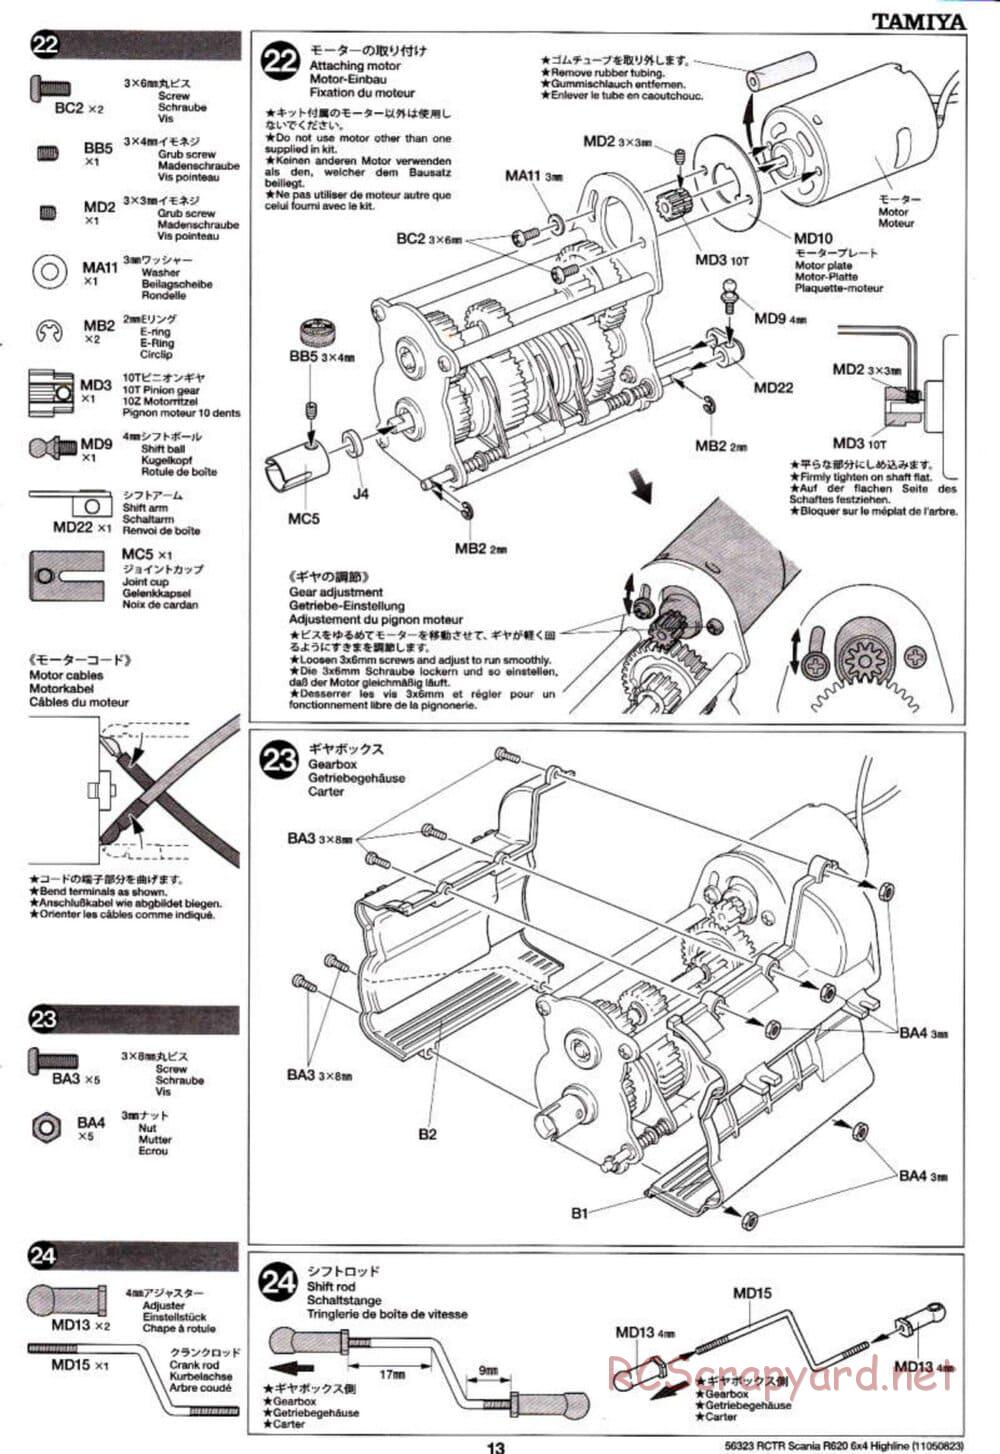 Tamiya - Scania R620 6x4 Highline Tractor Truck Chassis - Manual - Page 13